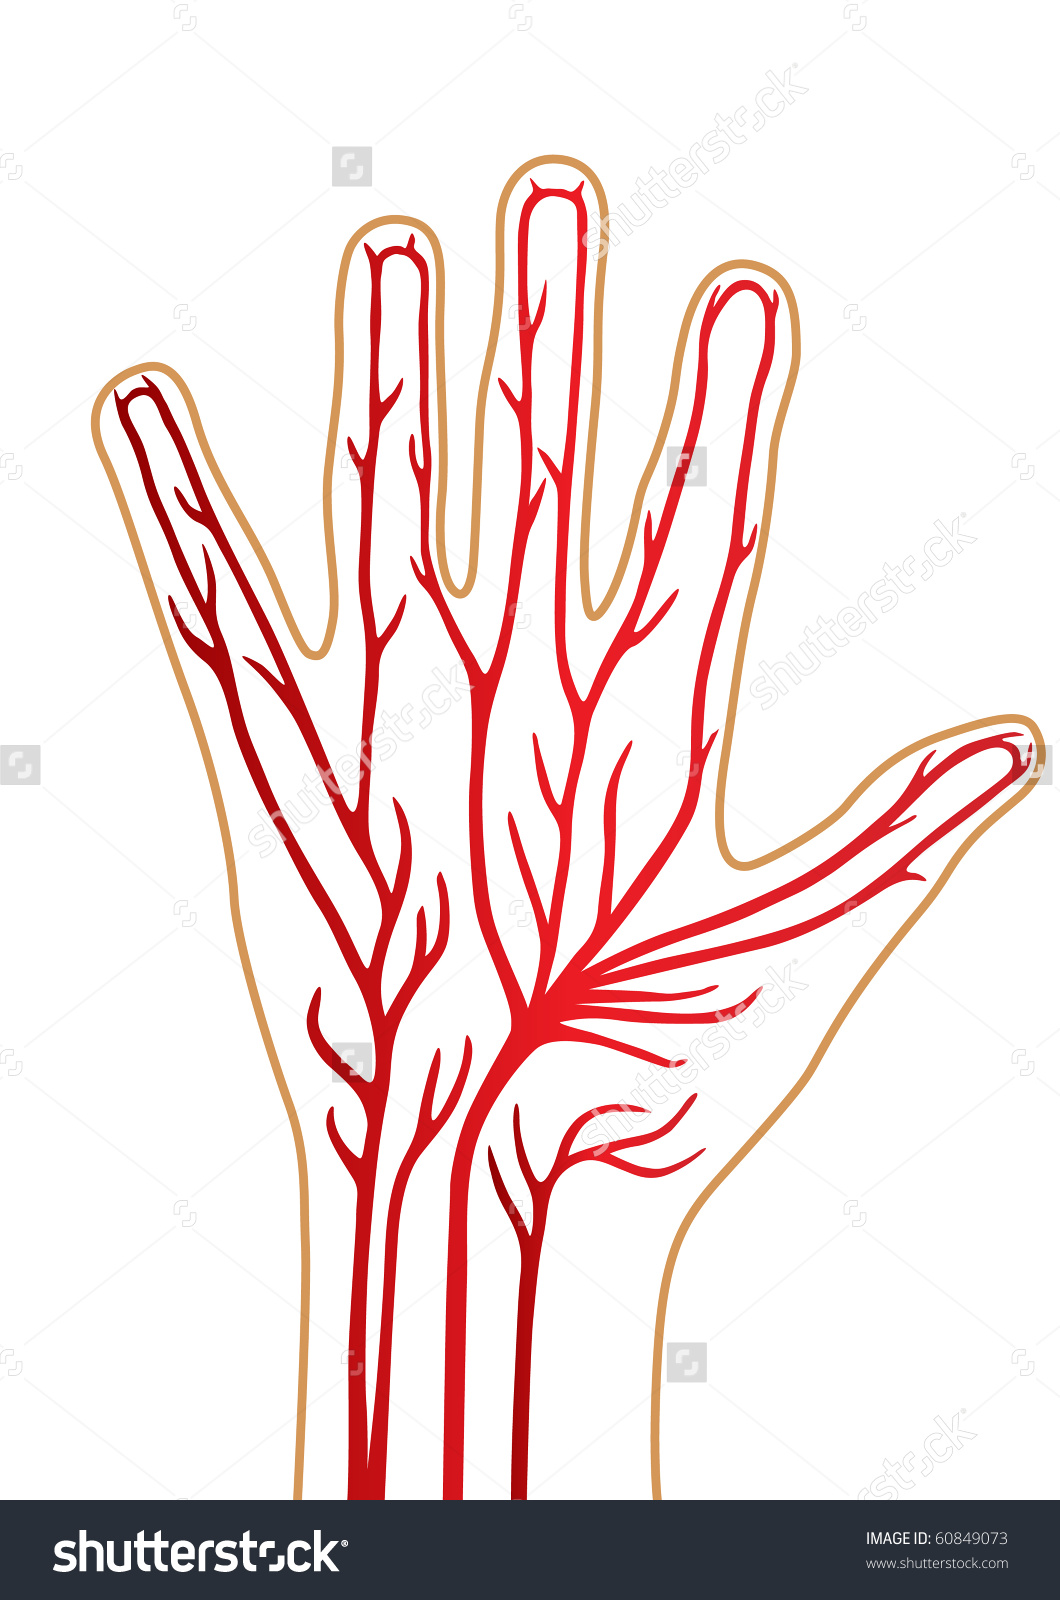 Vein clipart 20 free Cliparts | Download images on ... veins arteries capillaries diagram 